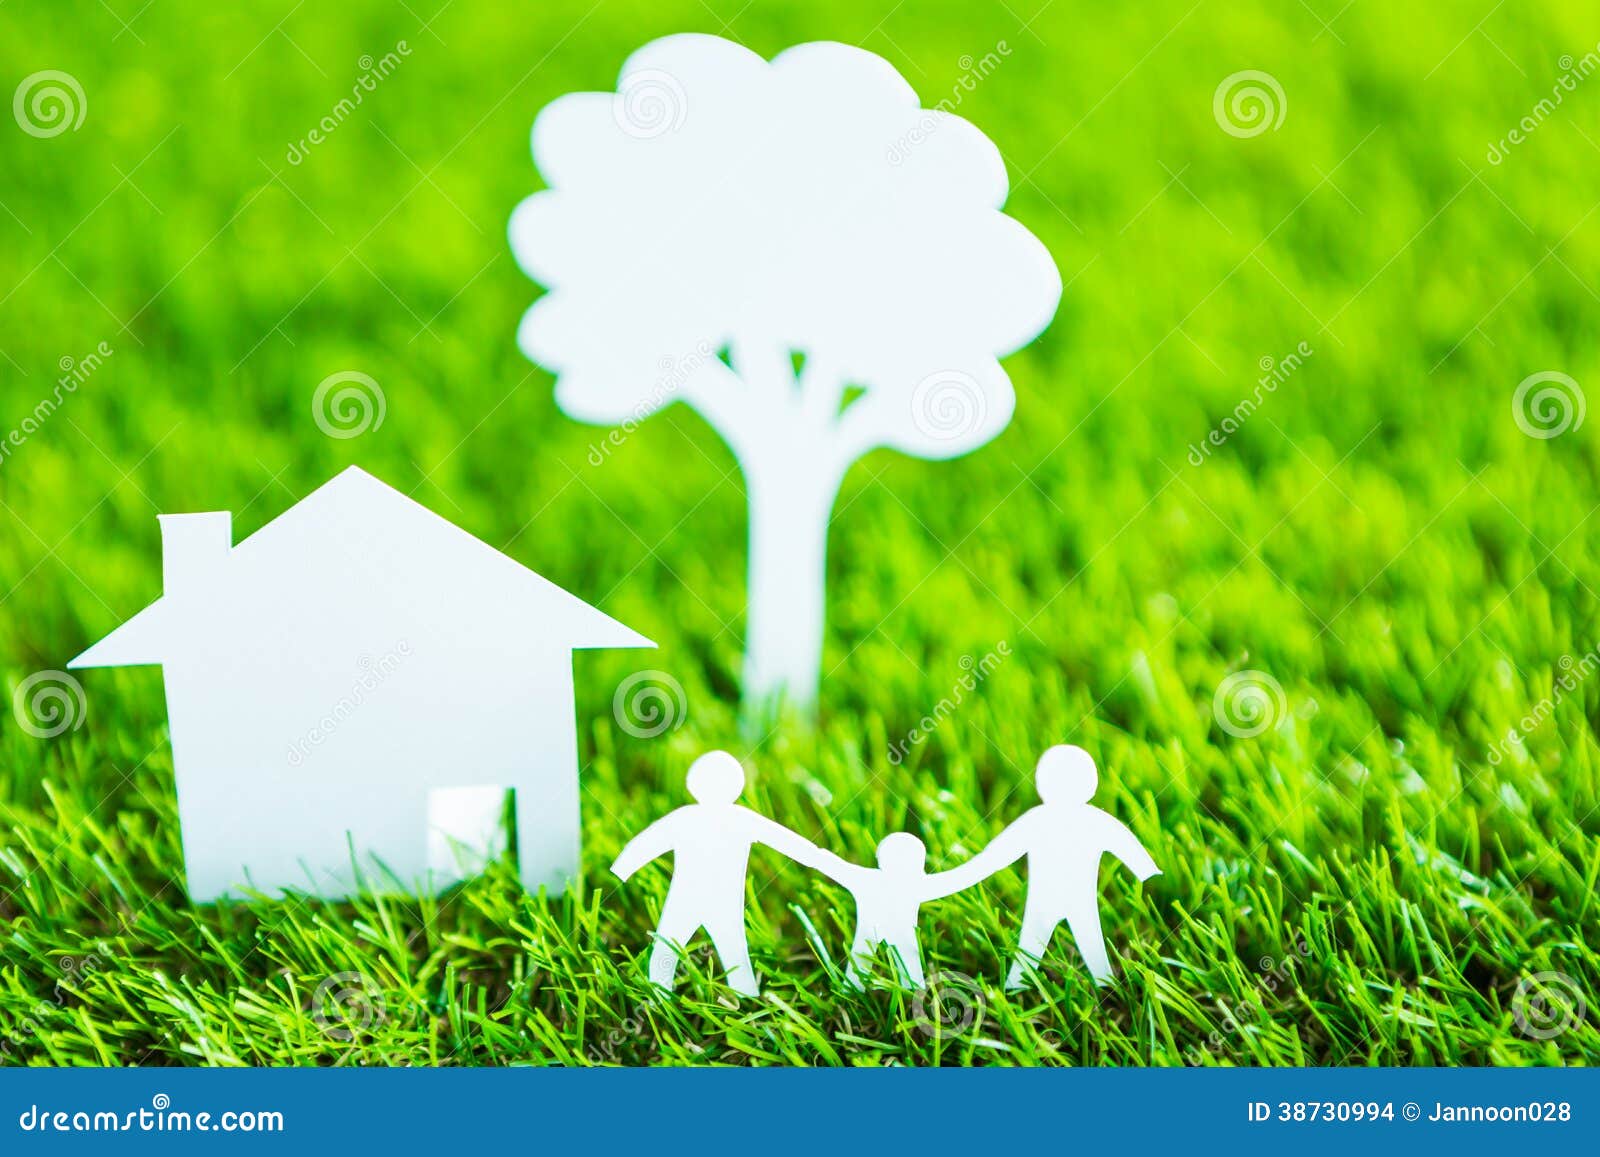 paper cut family house tree green grass fresh spring 38730994